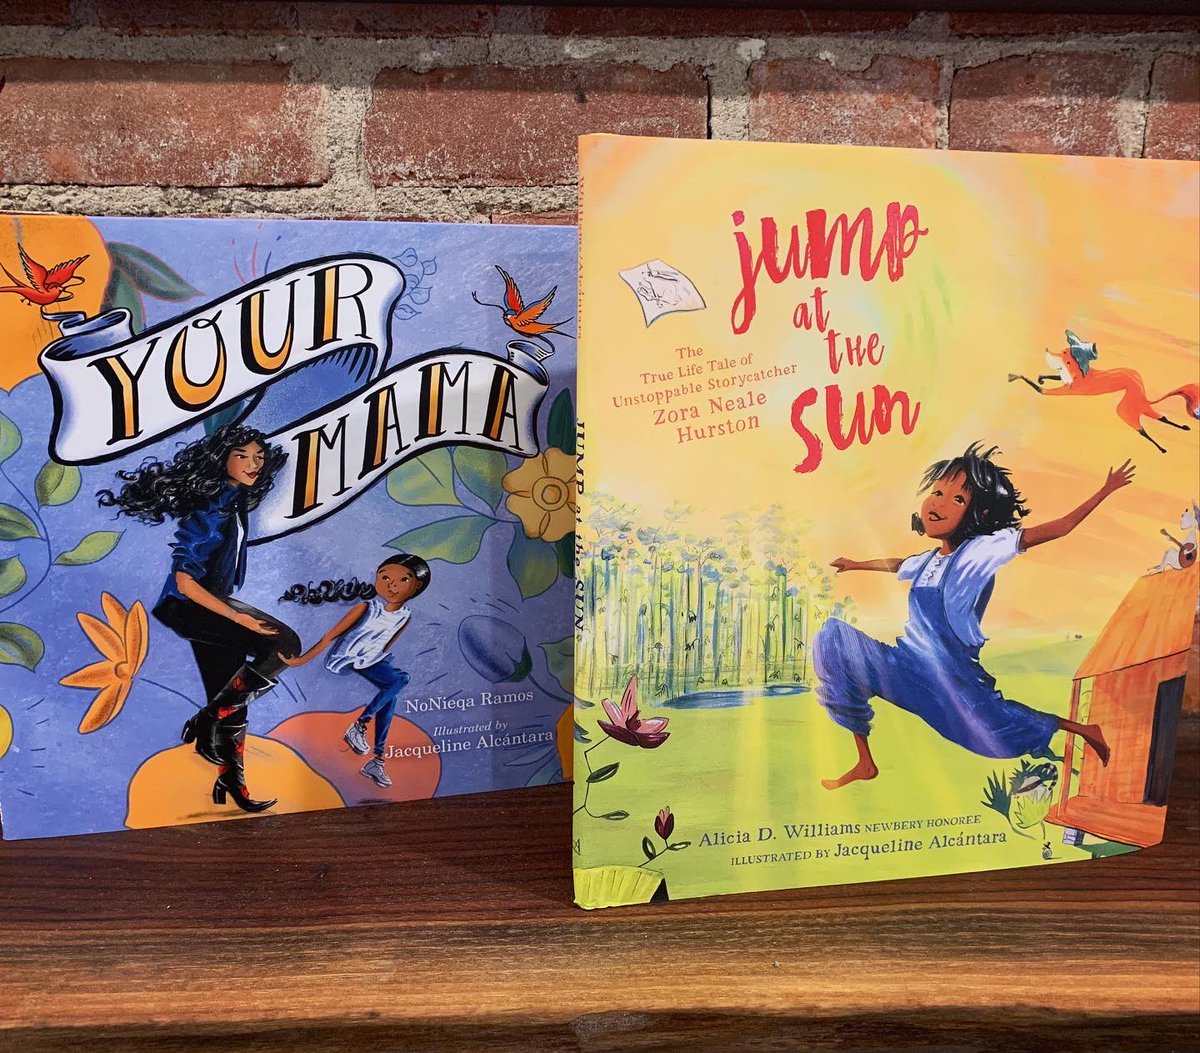 My 2021 book babies! I love you both so much!!! This weekend I’m thrilled to be a part of the @SABookFestival with both my books and both the incredible authors @storiestolife and @NoNieqaRamos !!! It’s gonna be a partay!!! #bookfestival #kidlit #virtualevents #weekendvibes